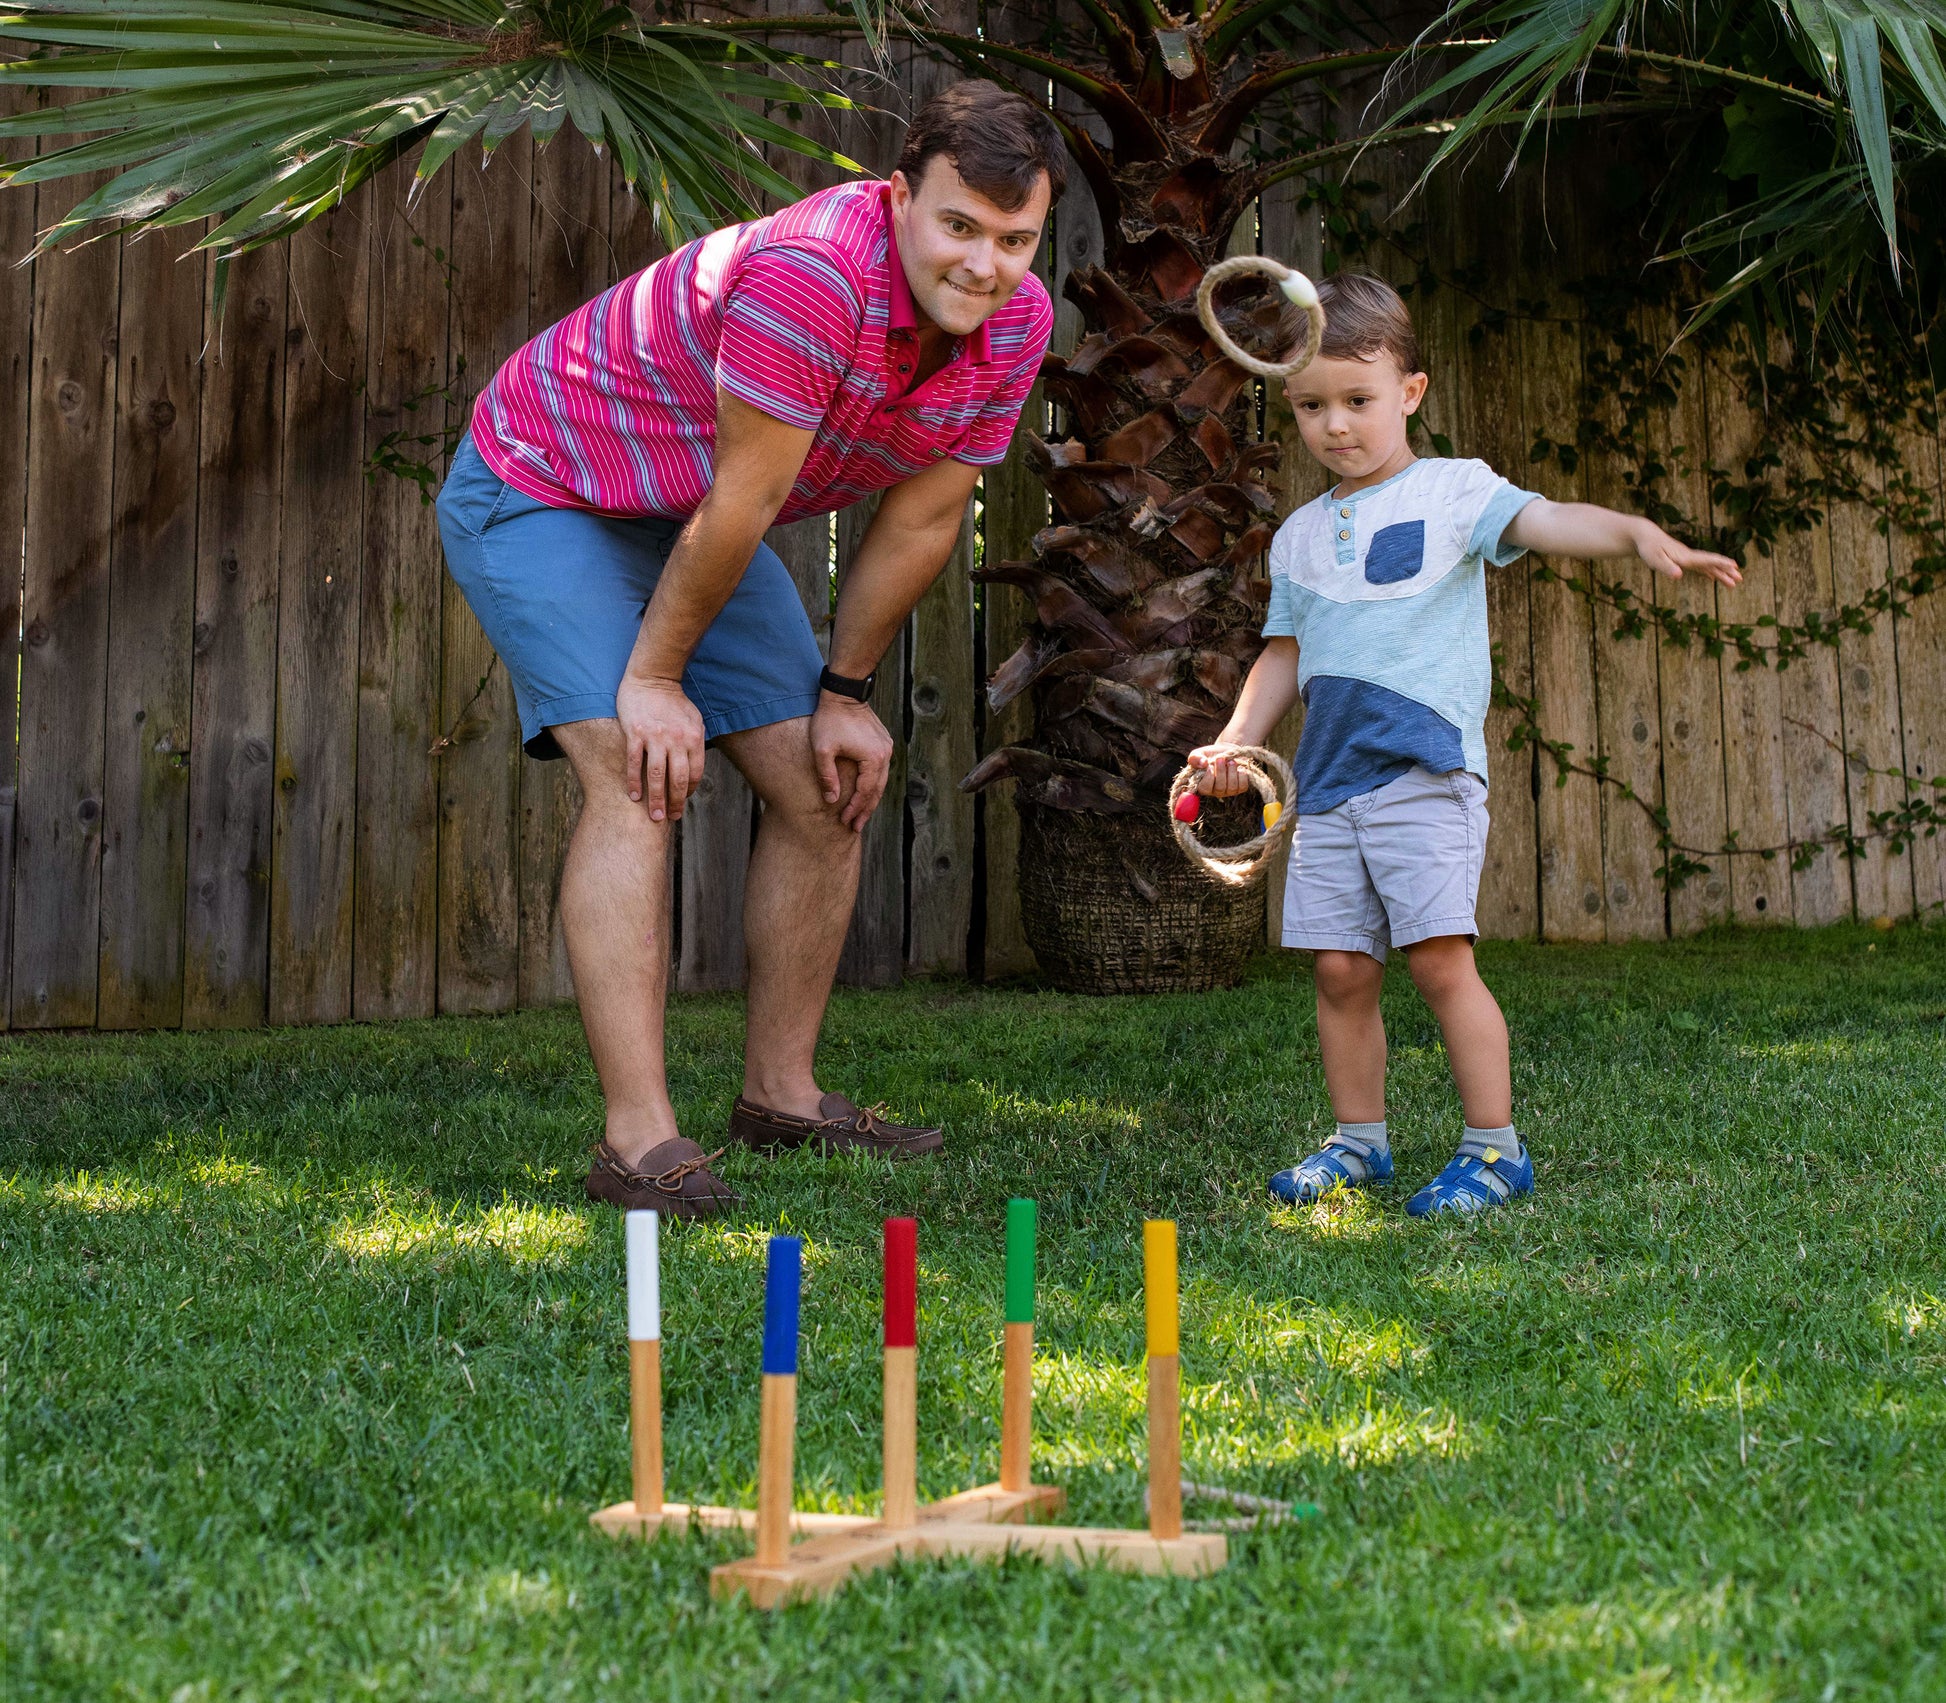 Yard Games Outdoor Giant Wooden Ring Toss Lawn Game w/ Soft Touch Throwing Rings